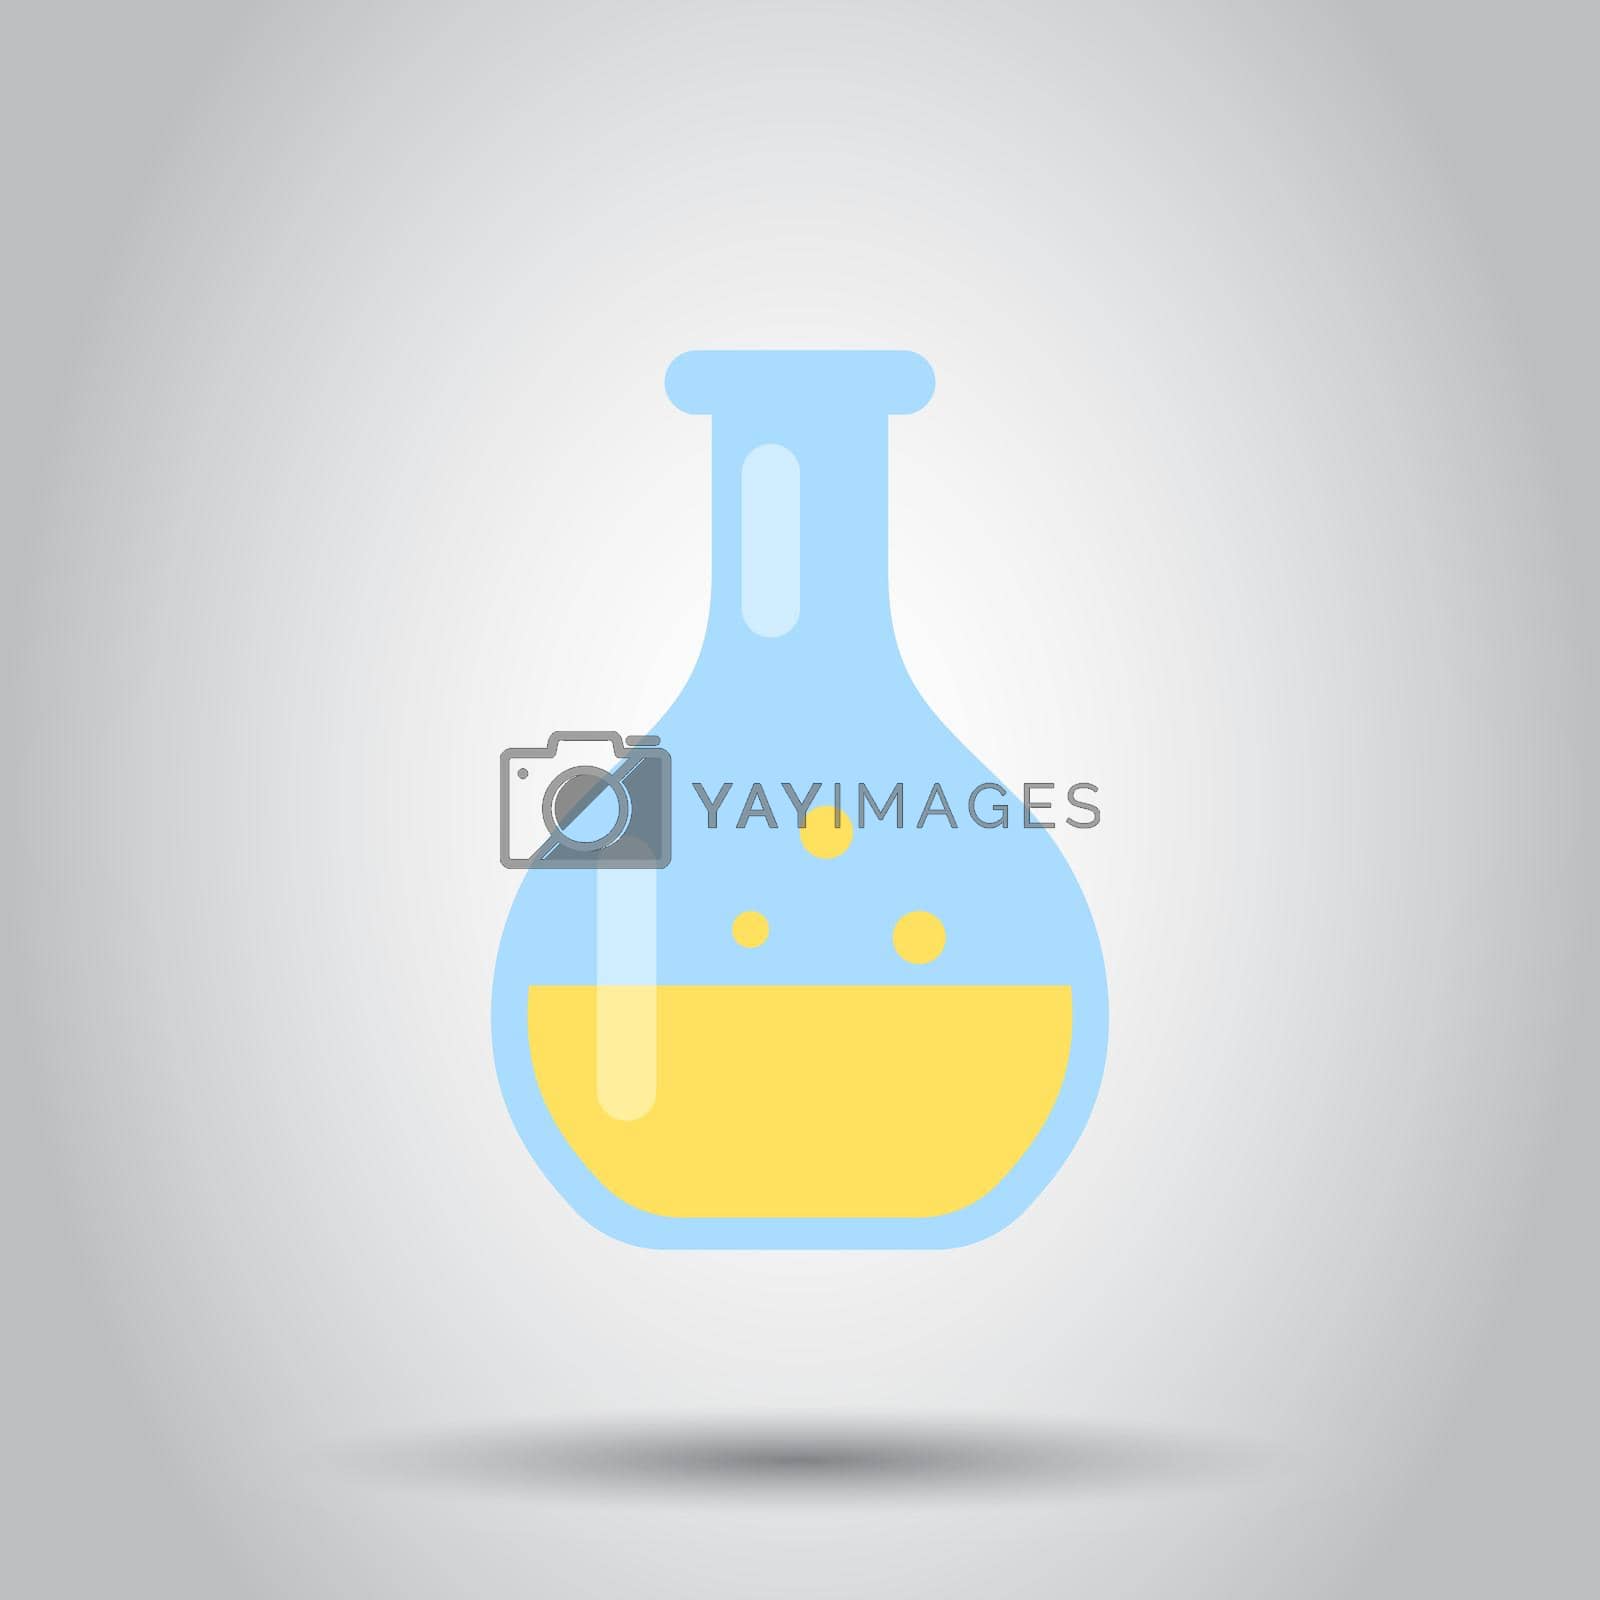 Royalty free image of Chemistry beakers sign icon in flat style. Flask test tube vector illustration on isolated background. Alchemy business concept. by LysenkoA